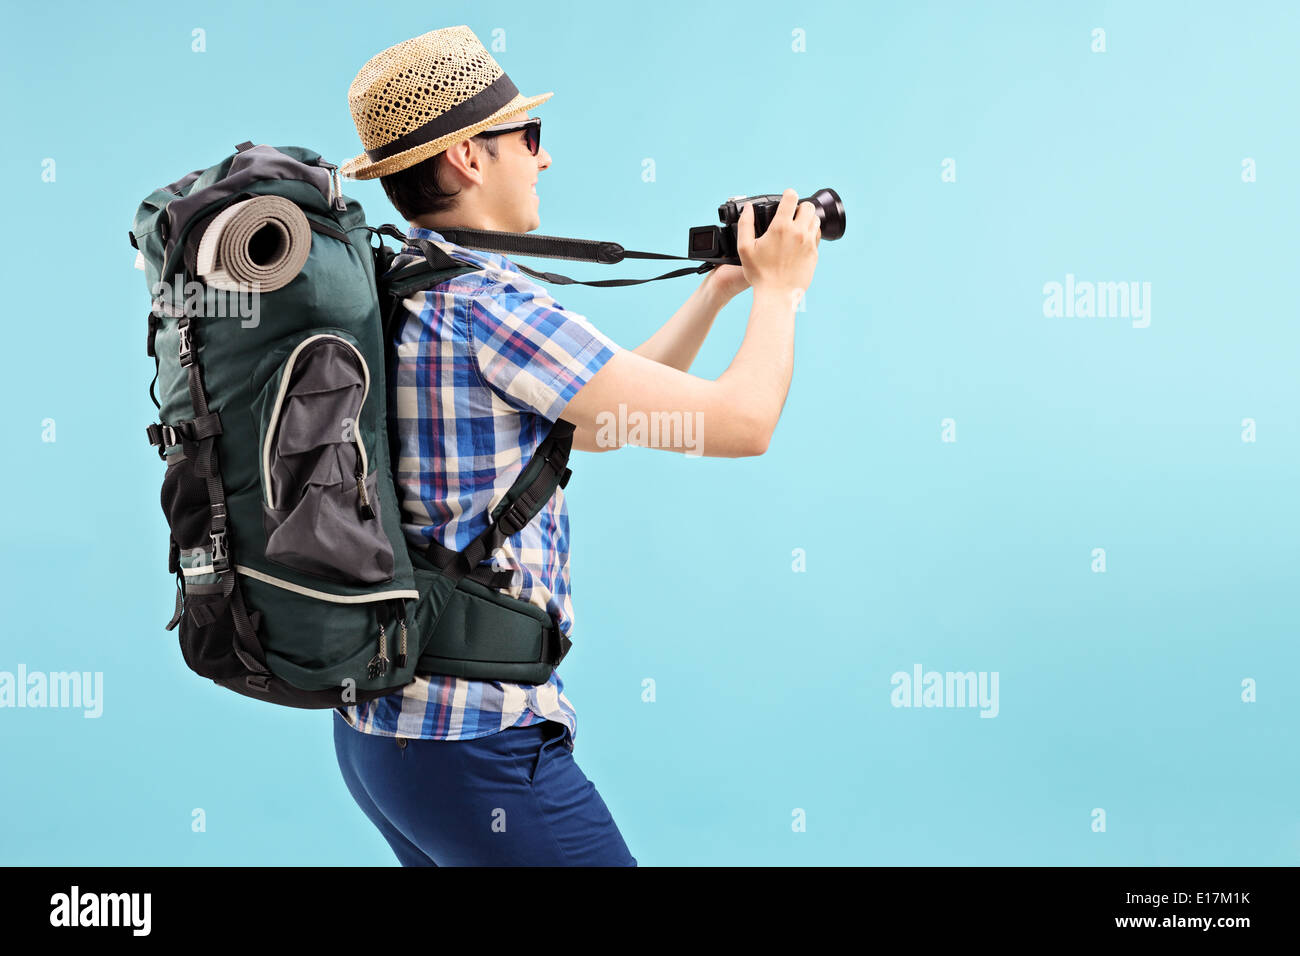 Young tourist taking a picture with camera on blue background Stock Photo